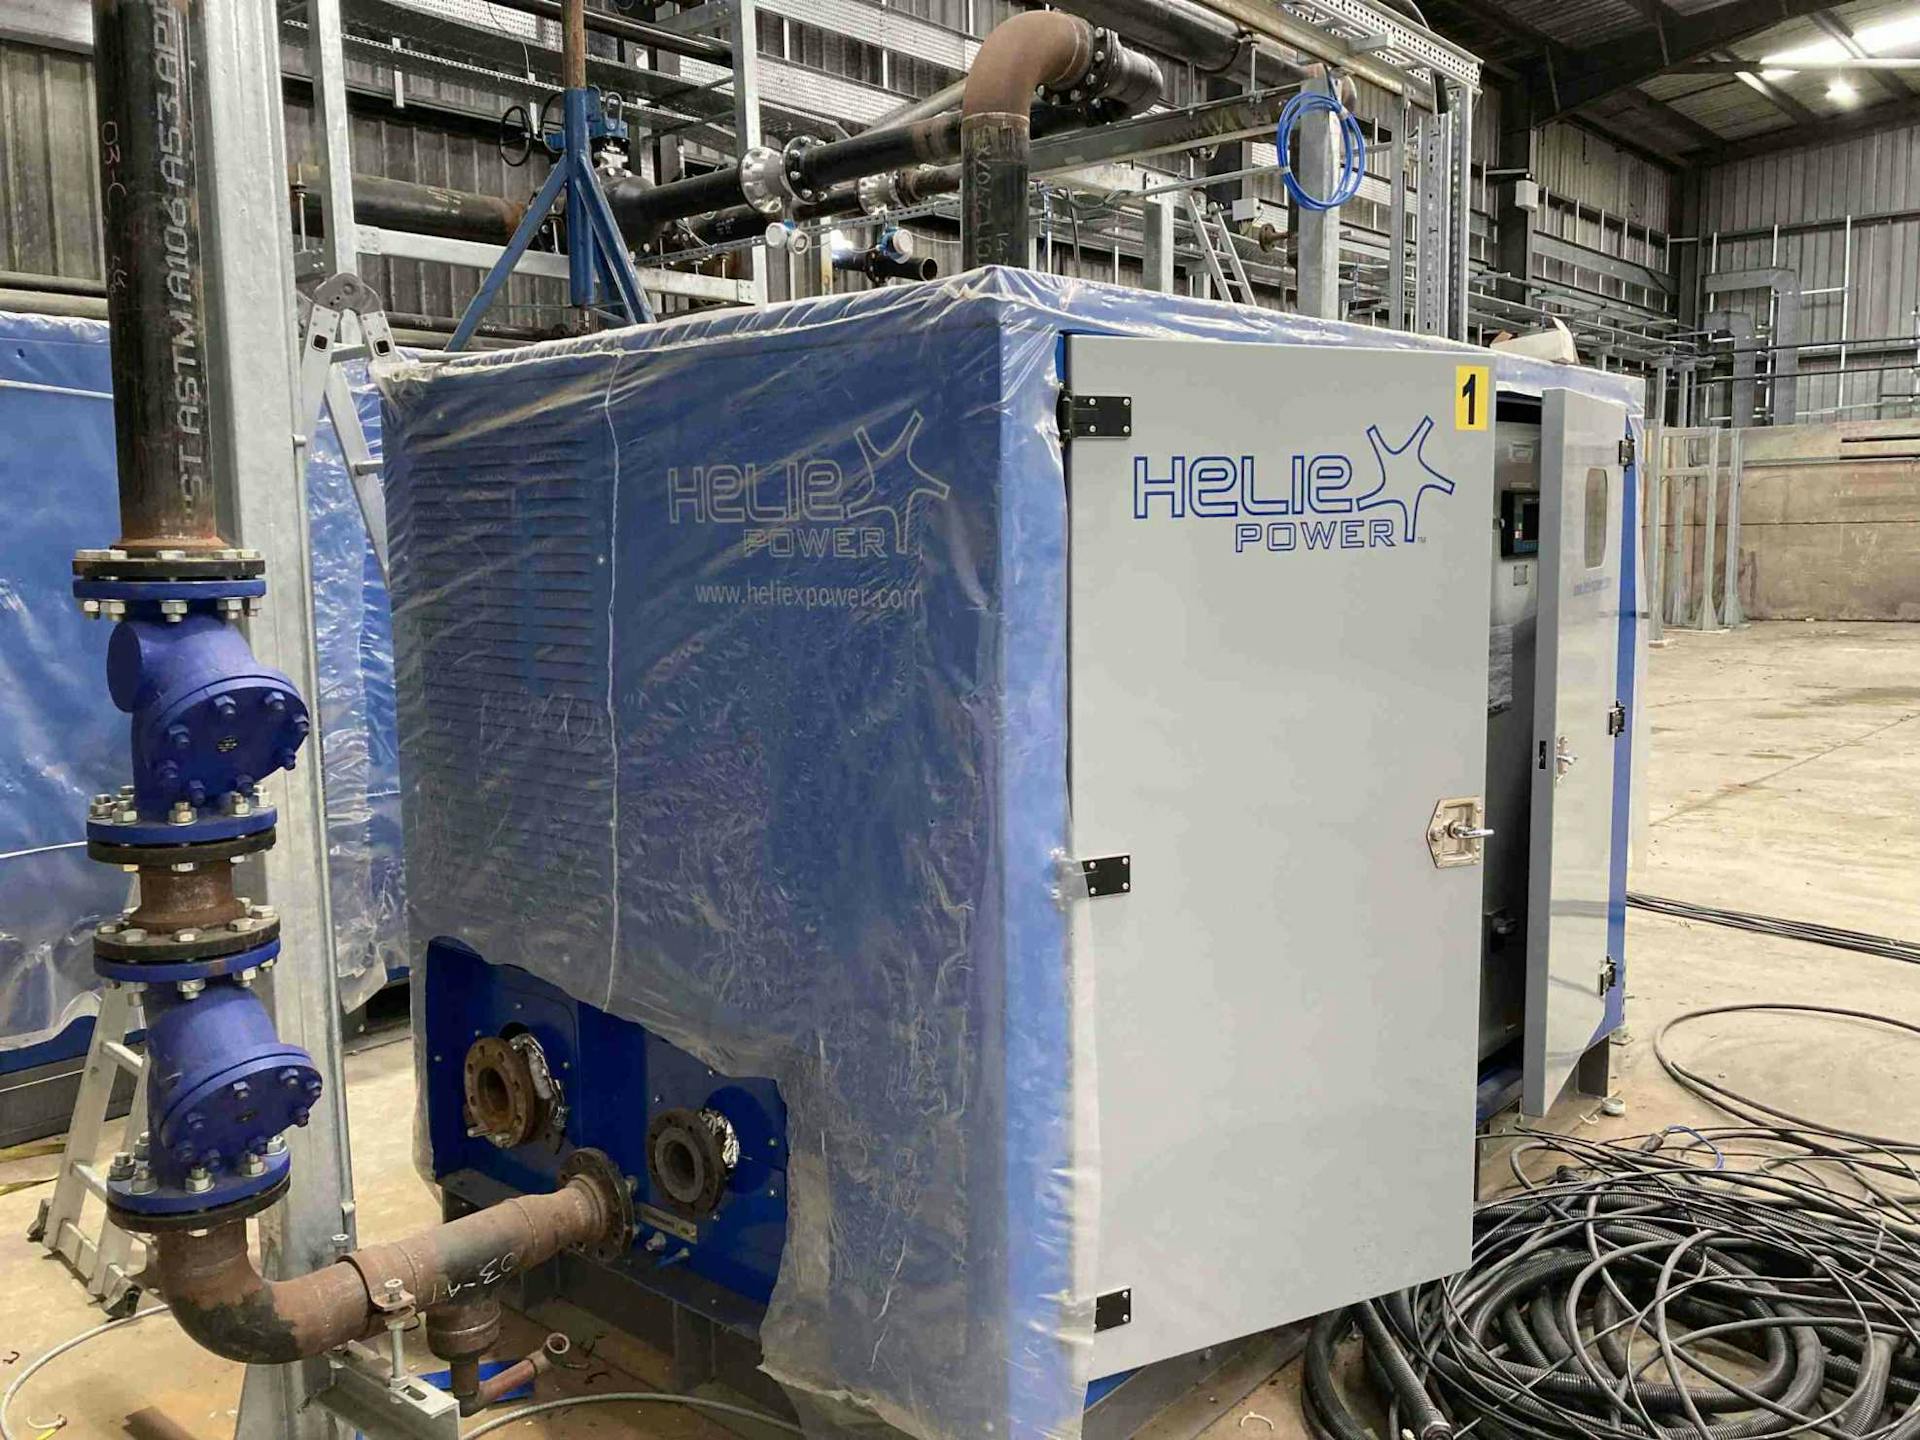 Heliex GenSet 8Image of Heliex steam expander generator set showing exterior and piping - preowned zero hours organic rankine cycle for sale